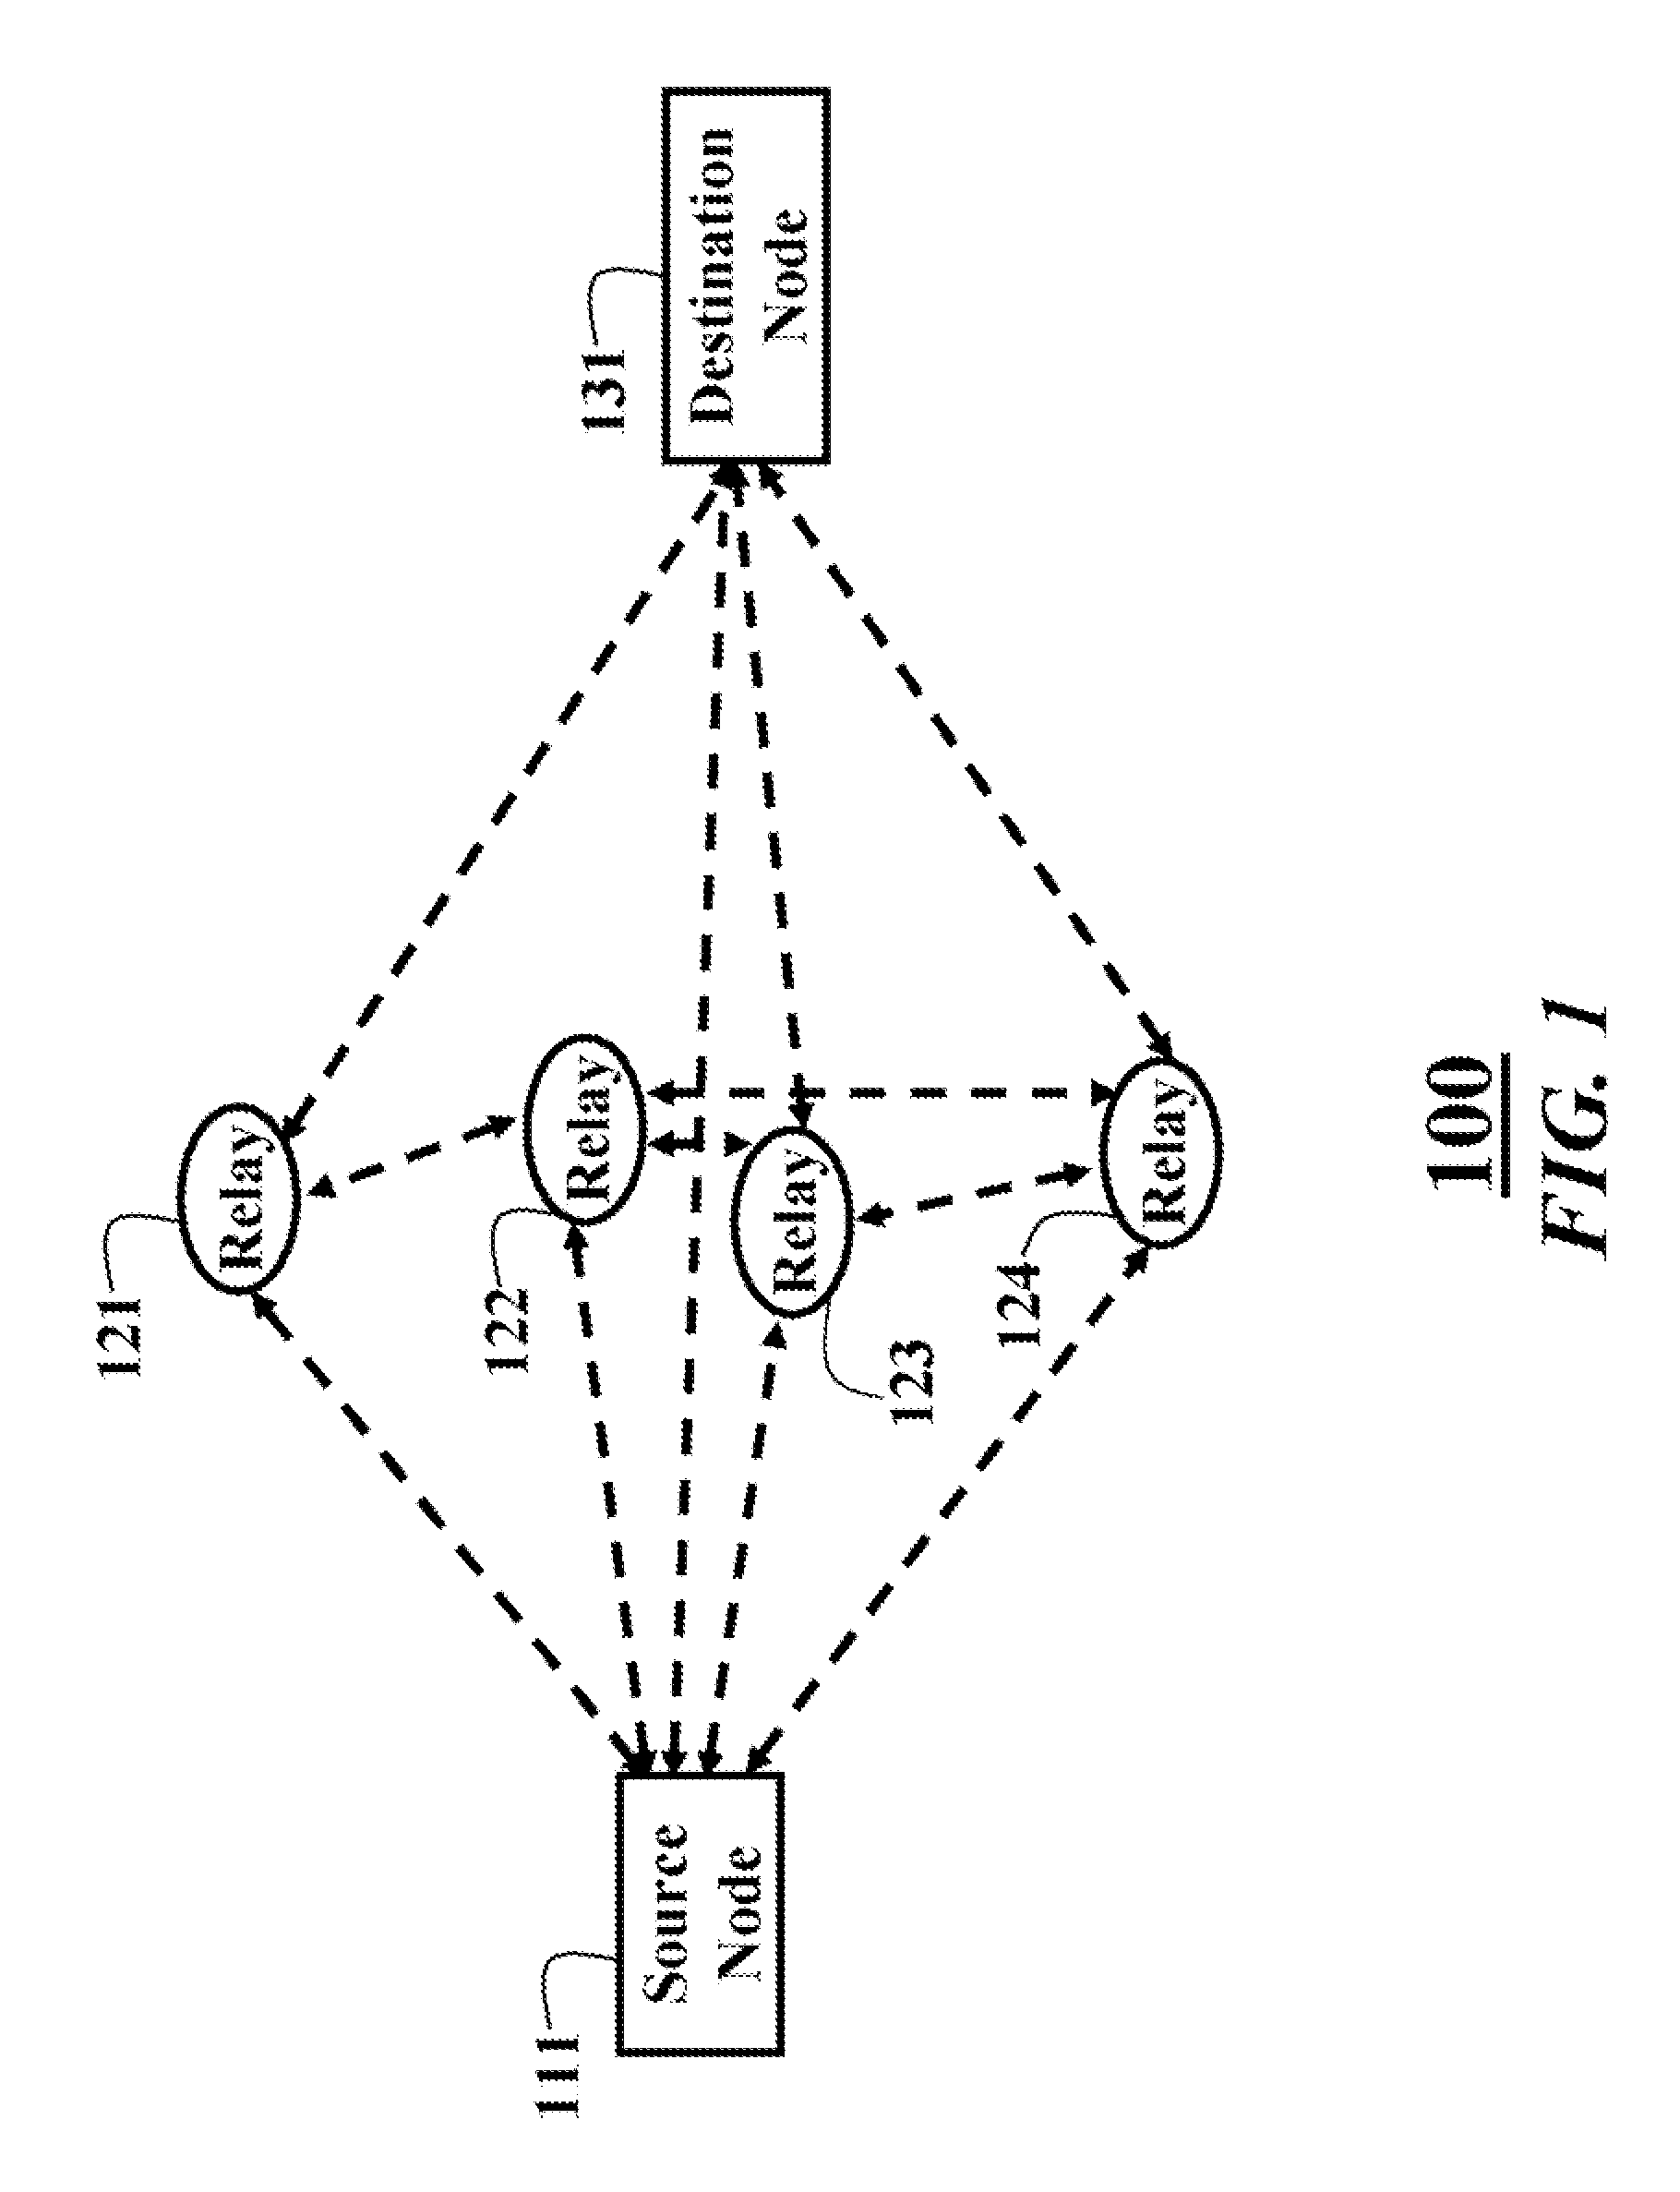 Cooperative Routing in Wireless Networks using Mutual-Information Accumulation